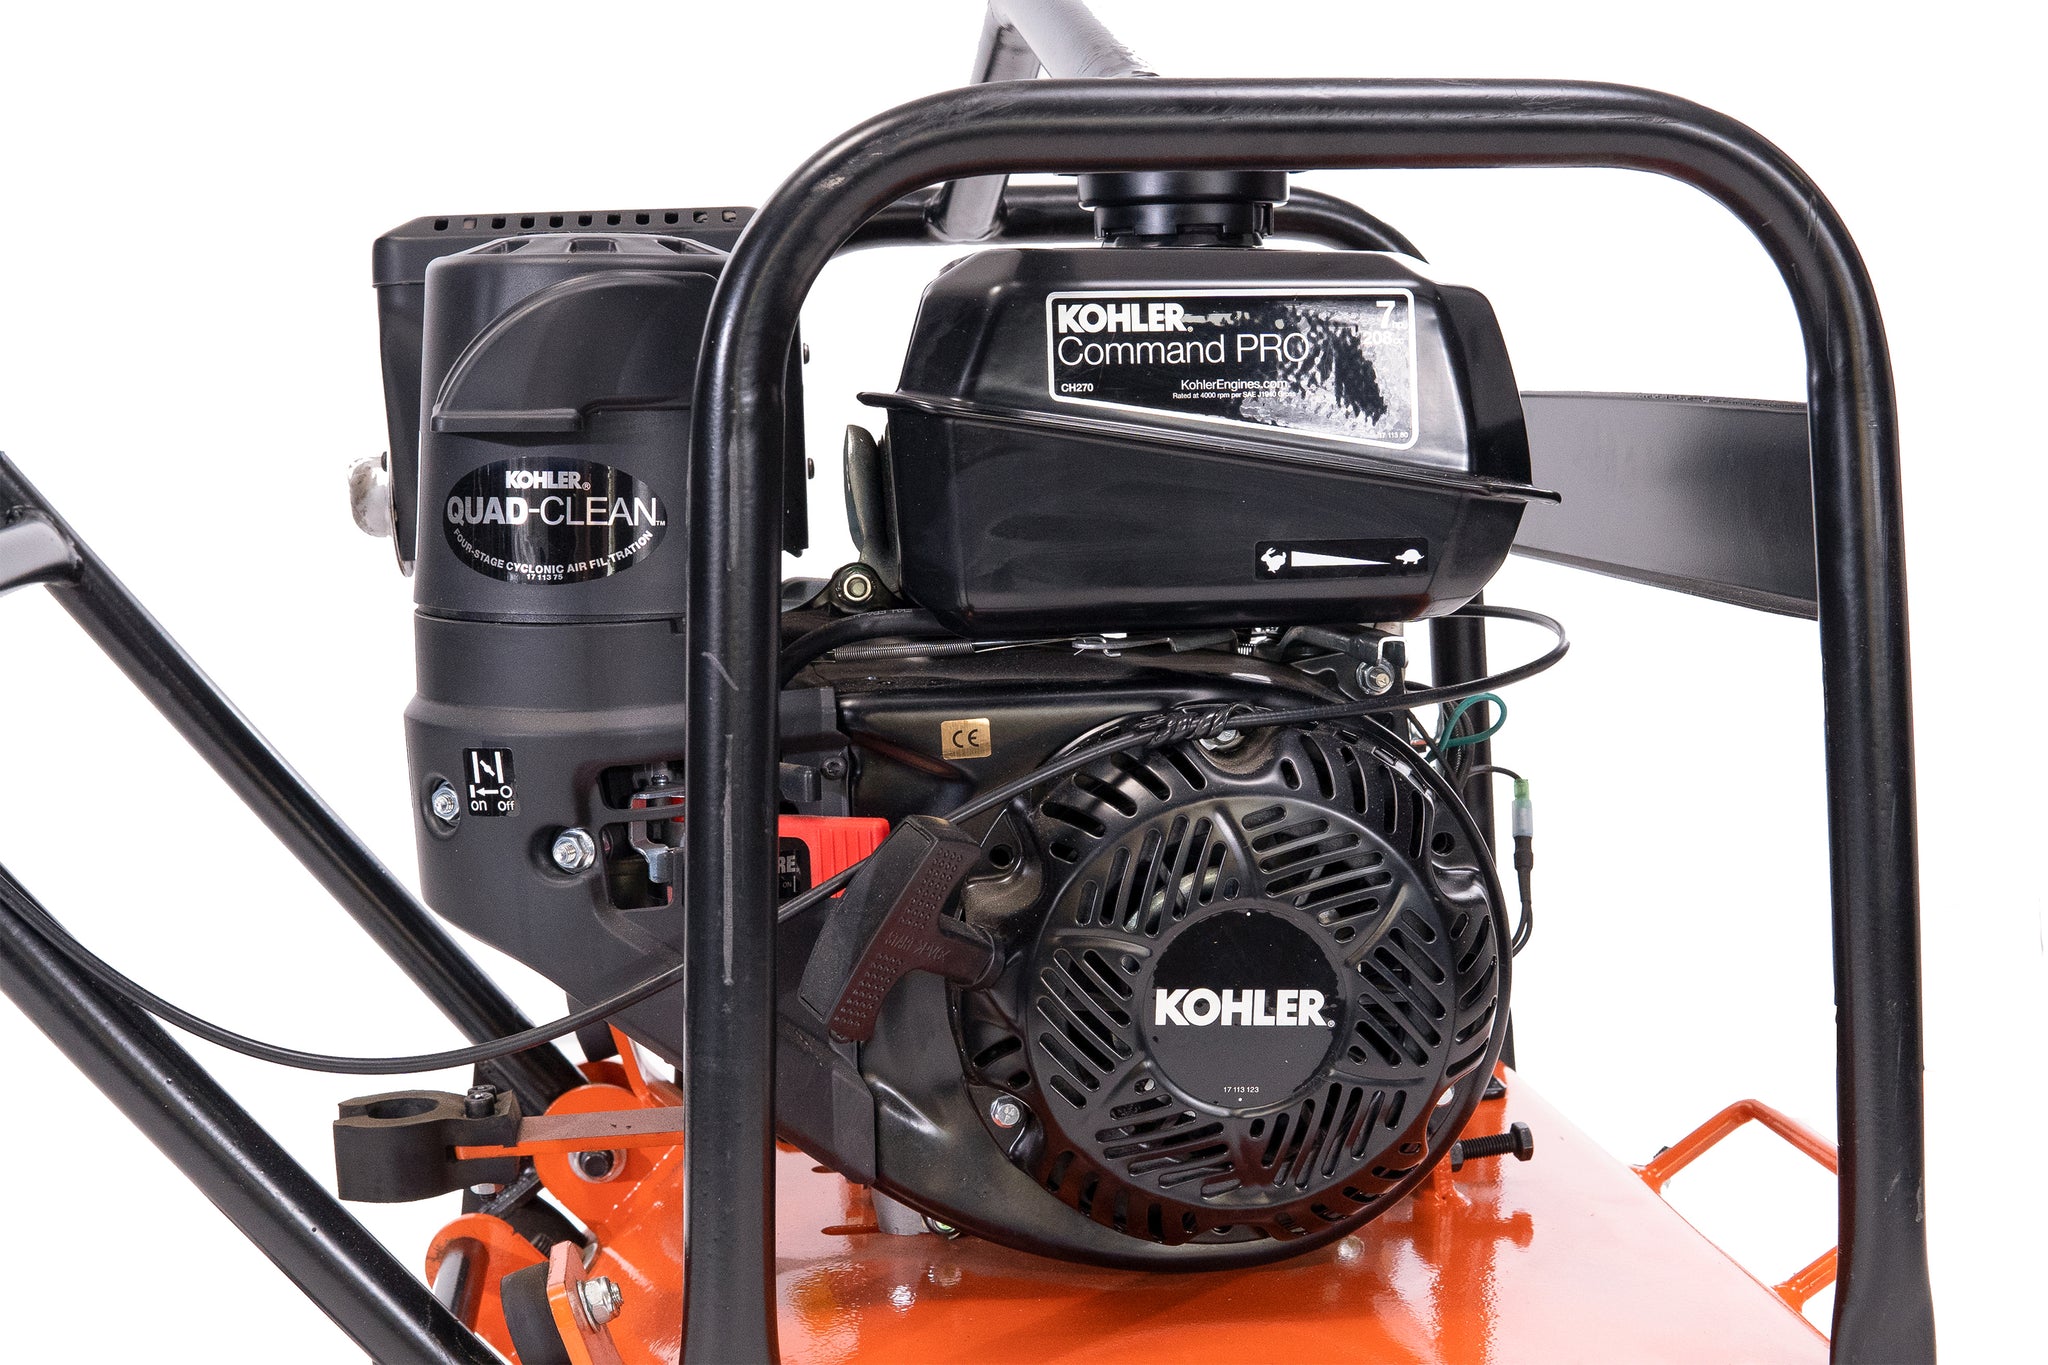 17" x 21" Plate Compactor Powered by a KOHLER® Command PRO® CH270 7 HP 208cc Engine